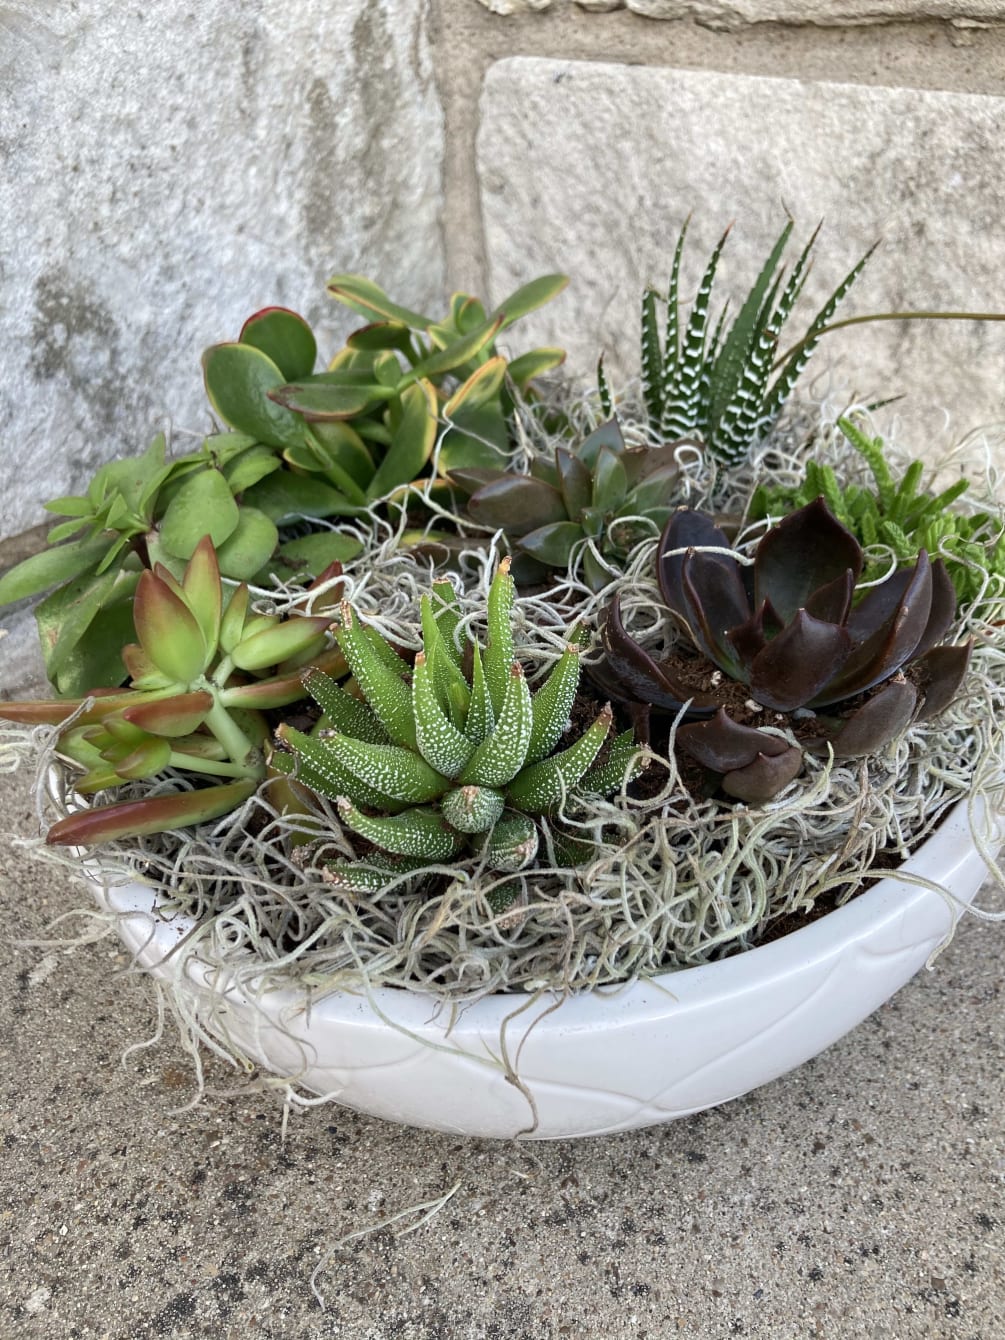 A visual variety of succulents to include Zebra Plant, Black Prince, Jade